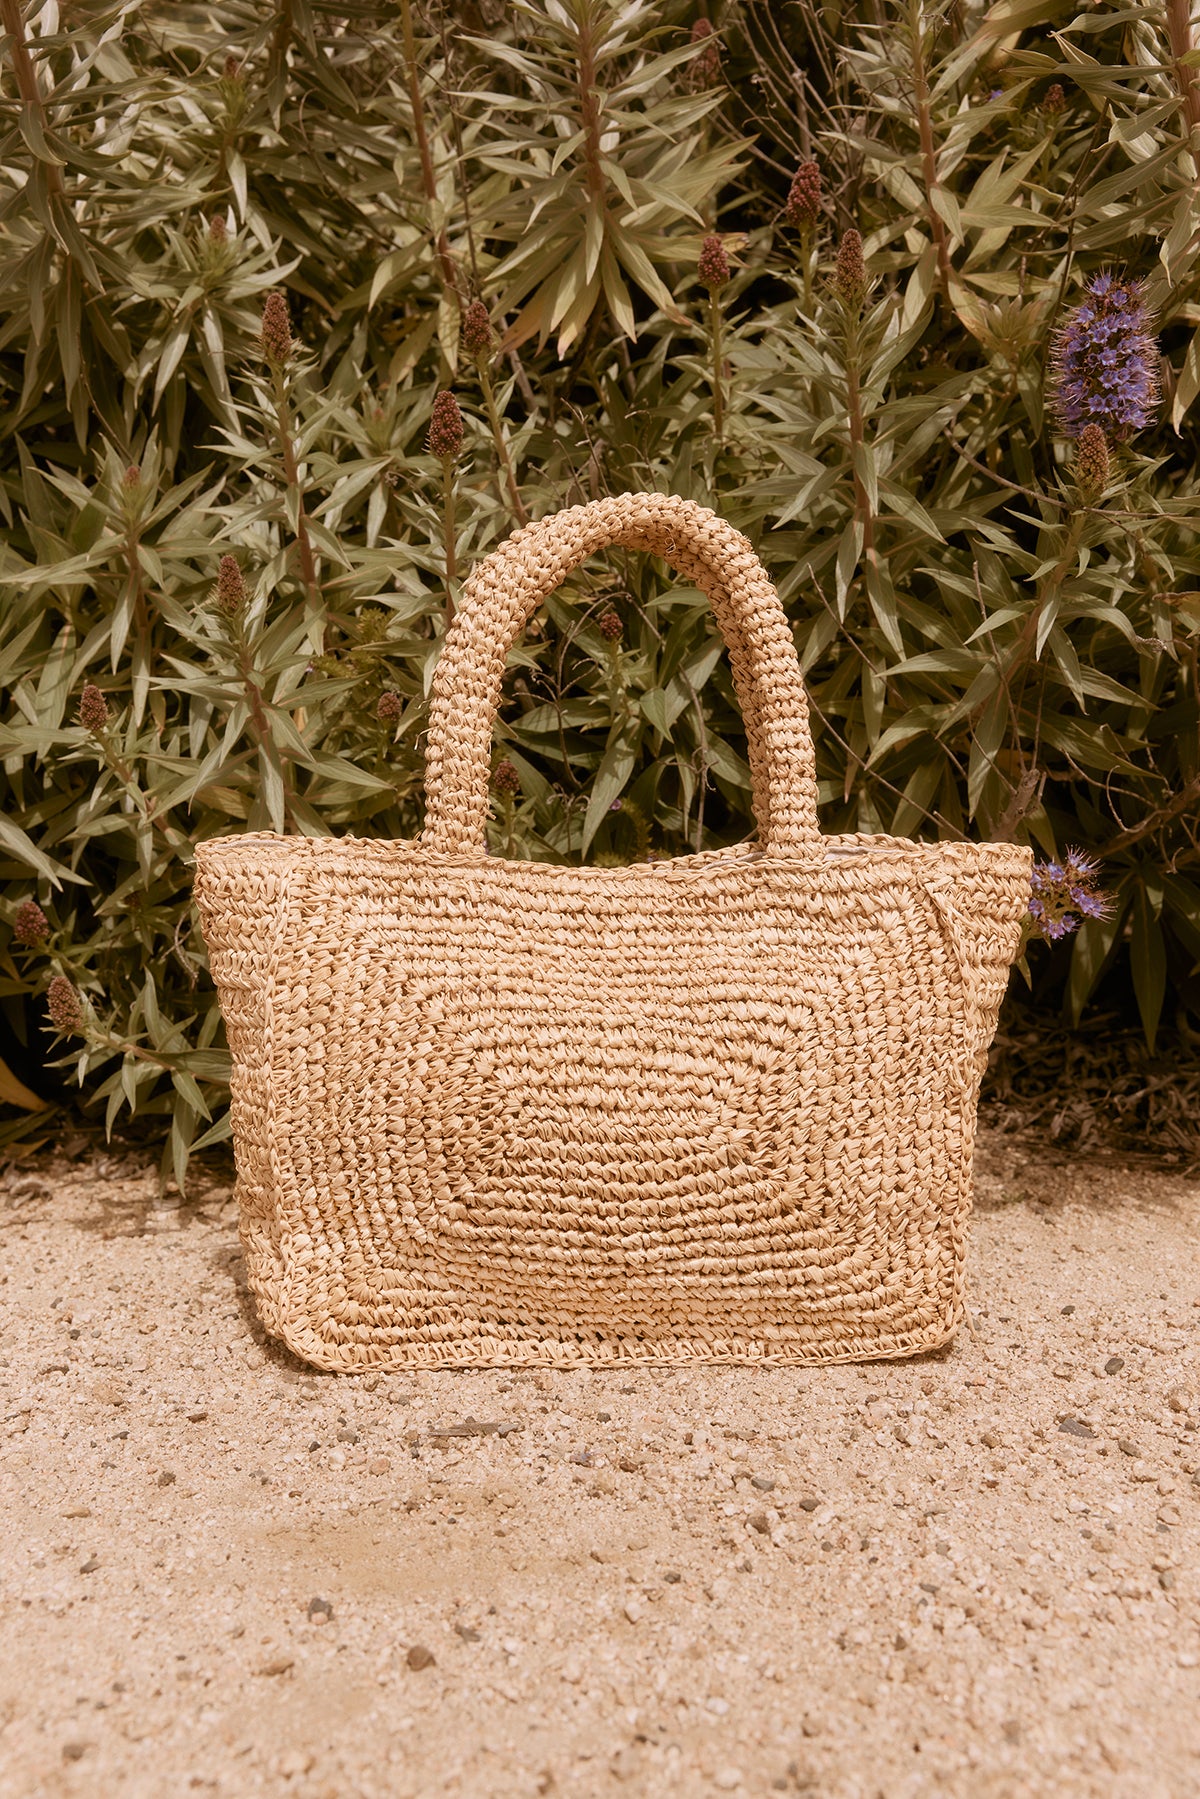   Woven raffia TINA STRAW TOTE BAG by Velvet by Graham & Spencer sits on sandy ground against a backdrop of leafy and flowering plants. 